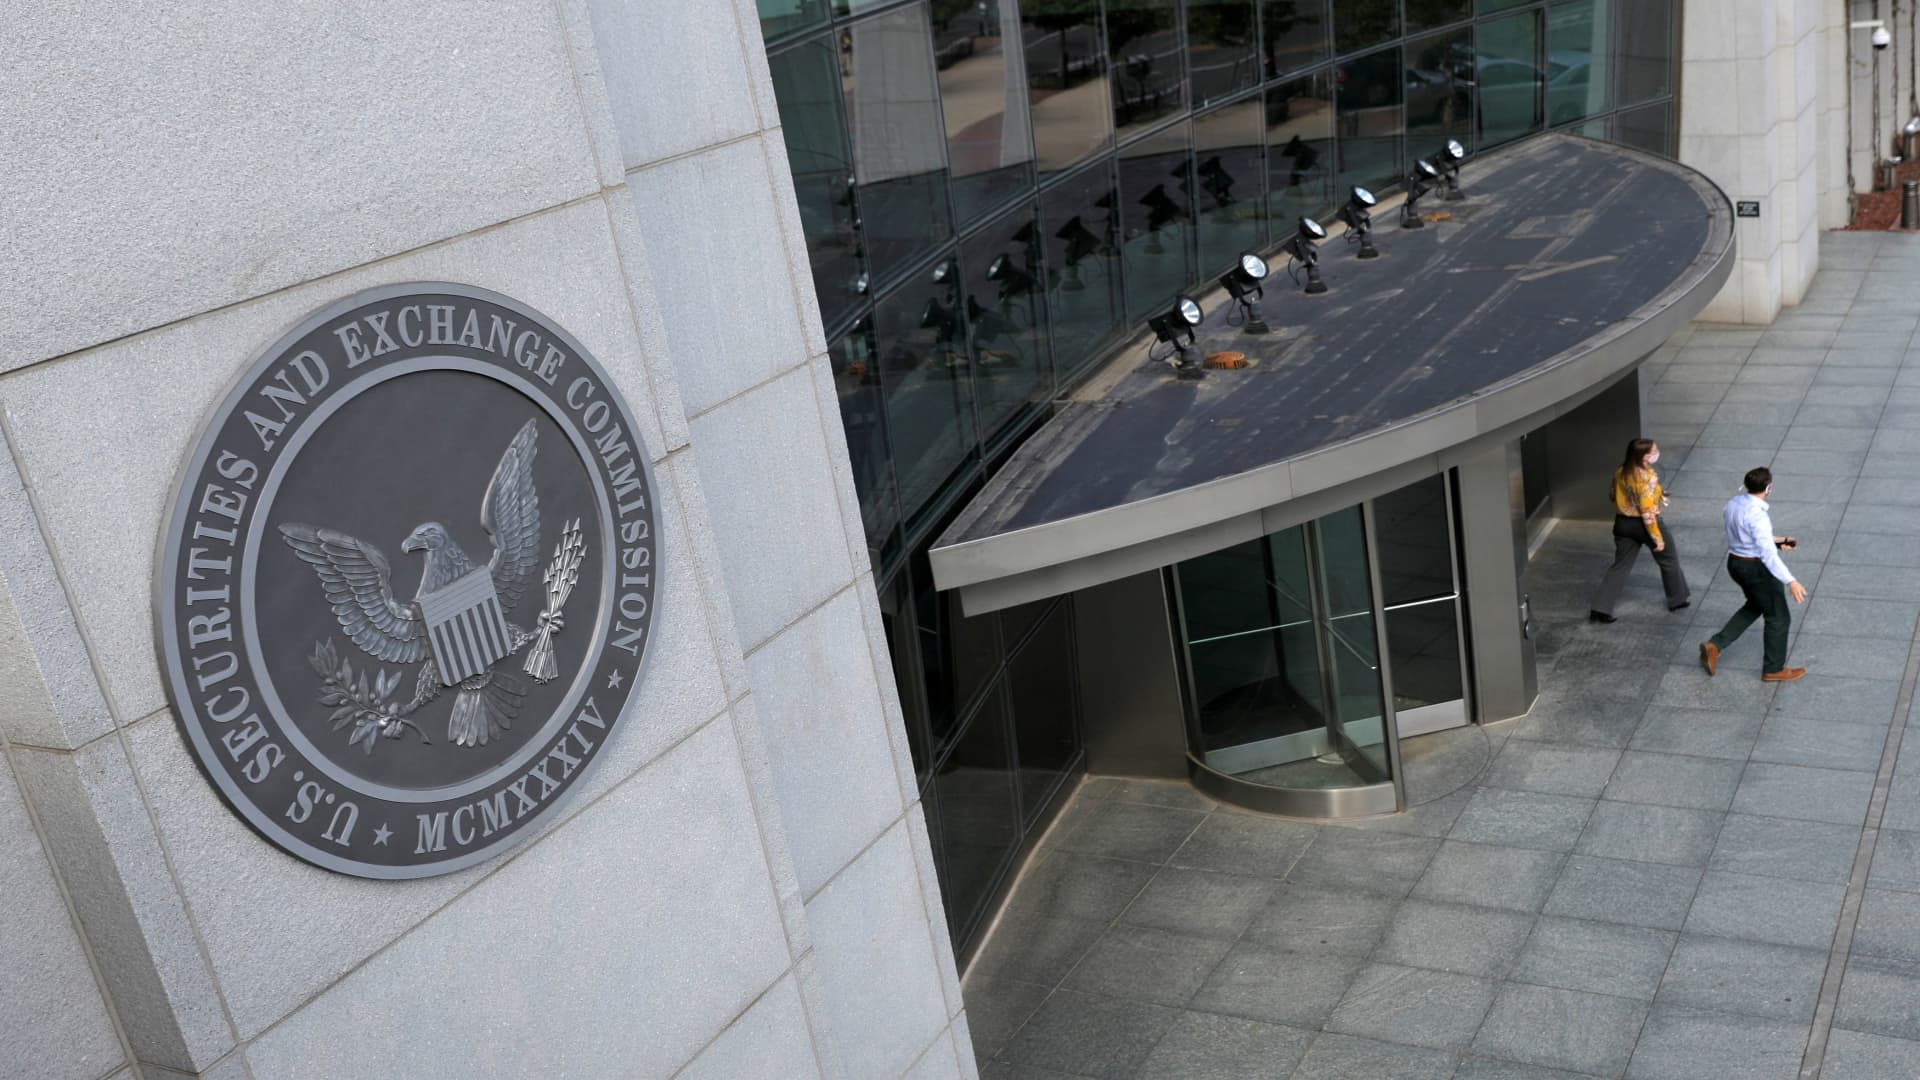 New details emerge about SEC's X account hack, including SIM swap